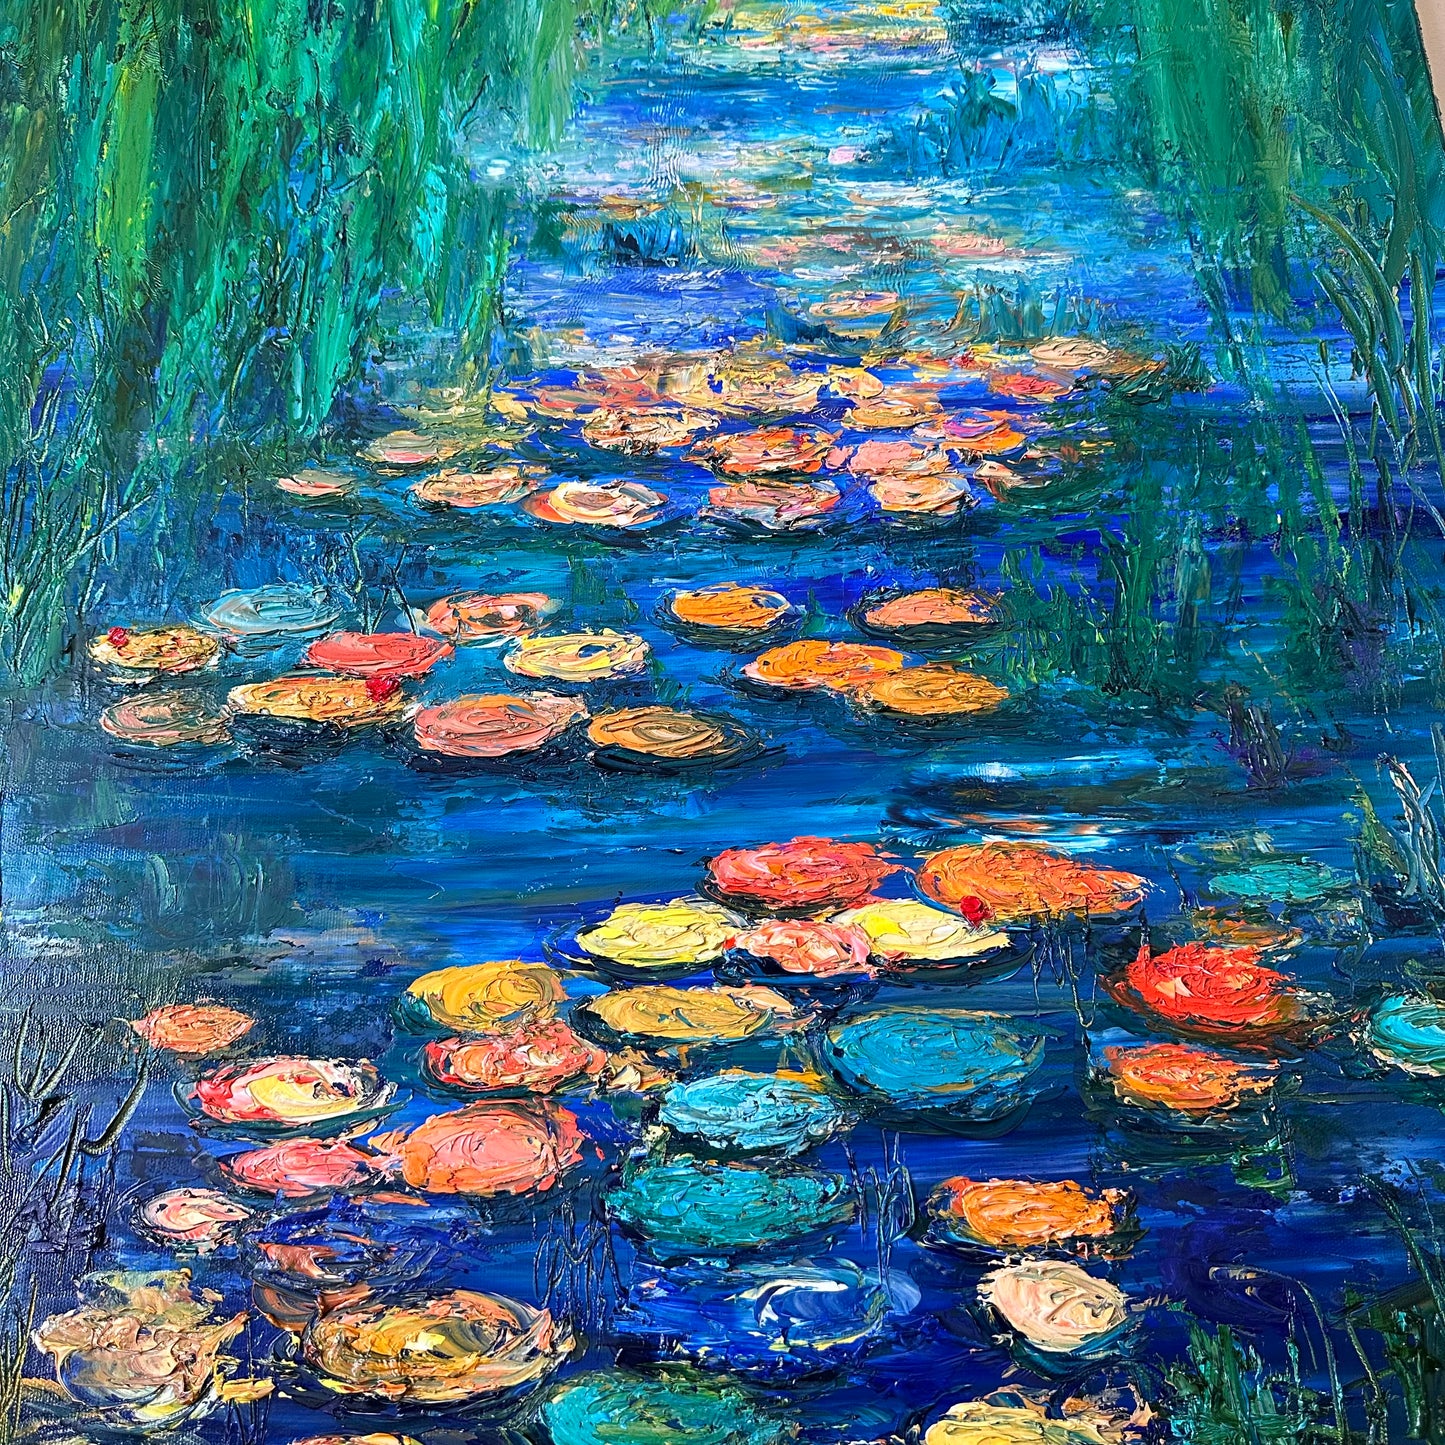 Water Lilies, OIL, 30" x 24"